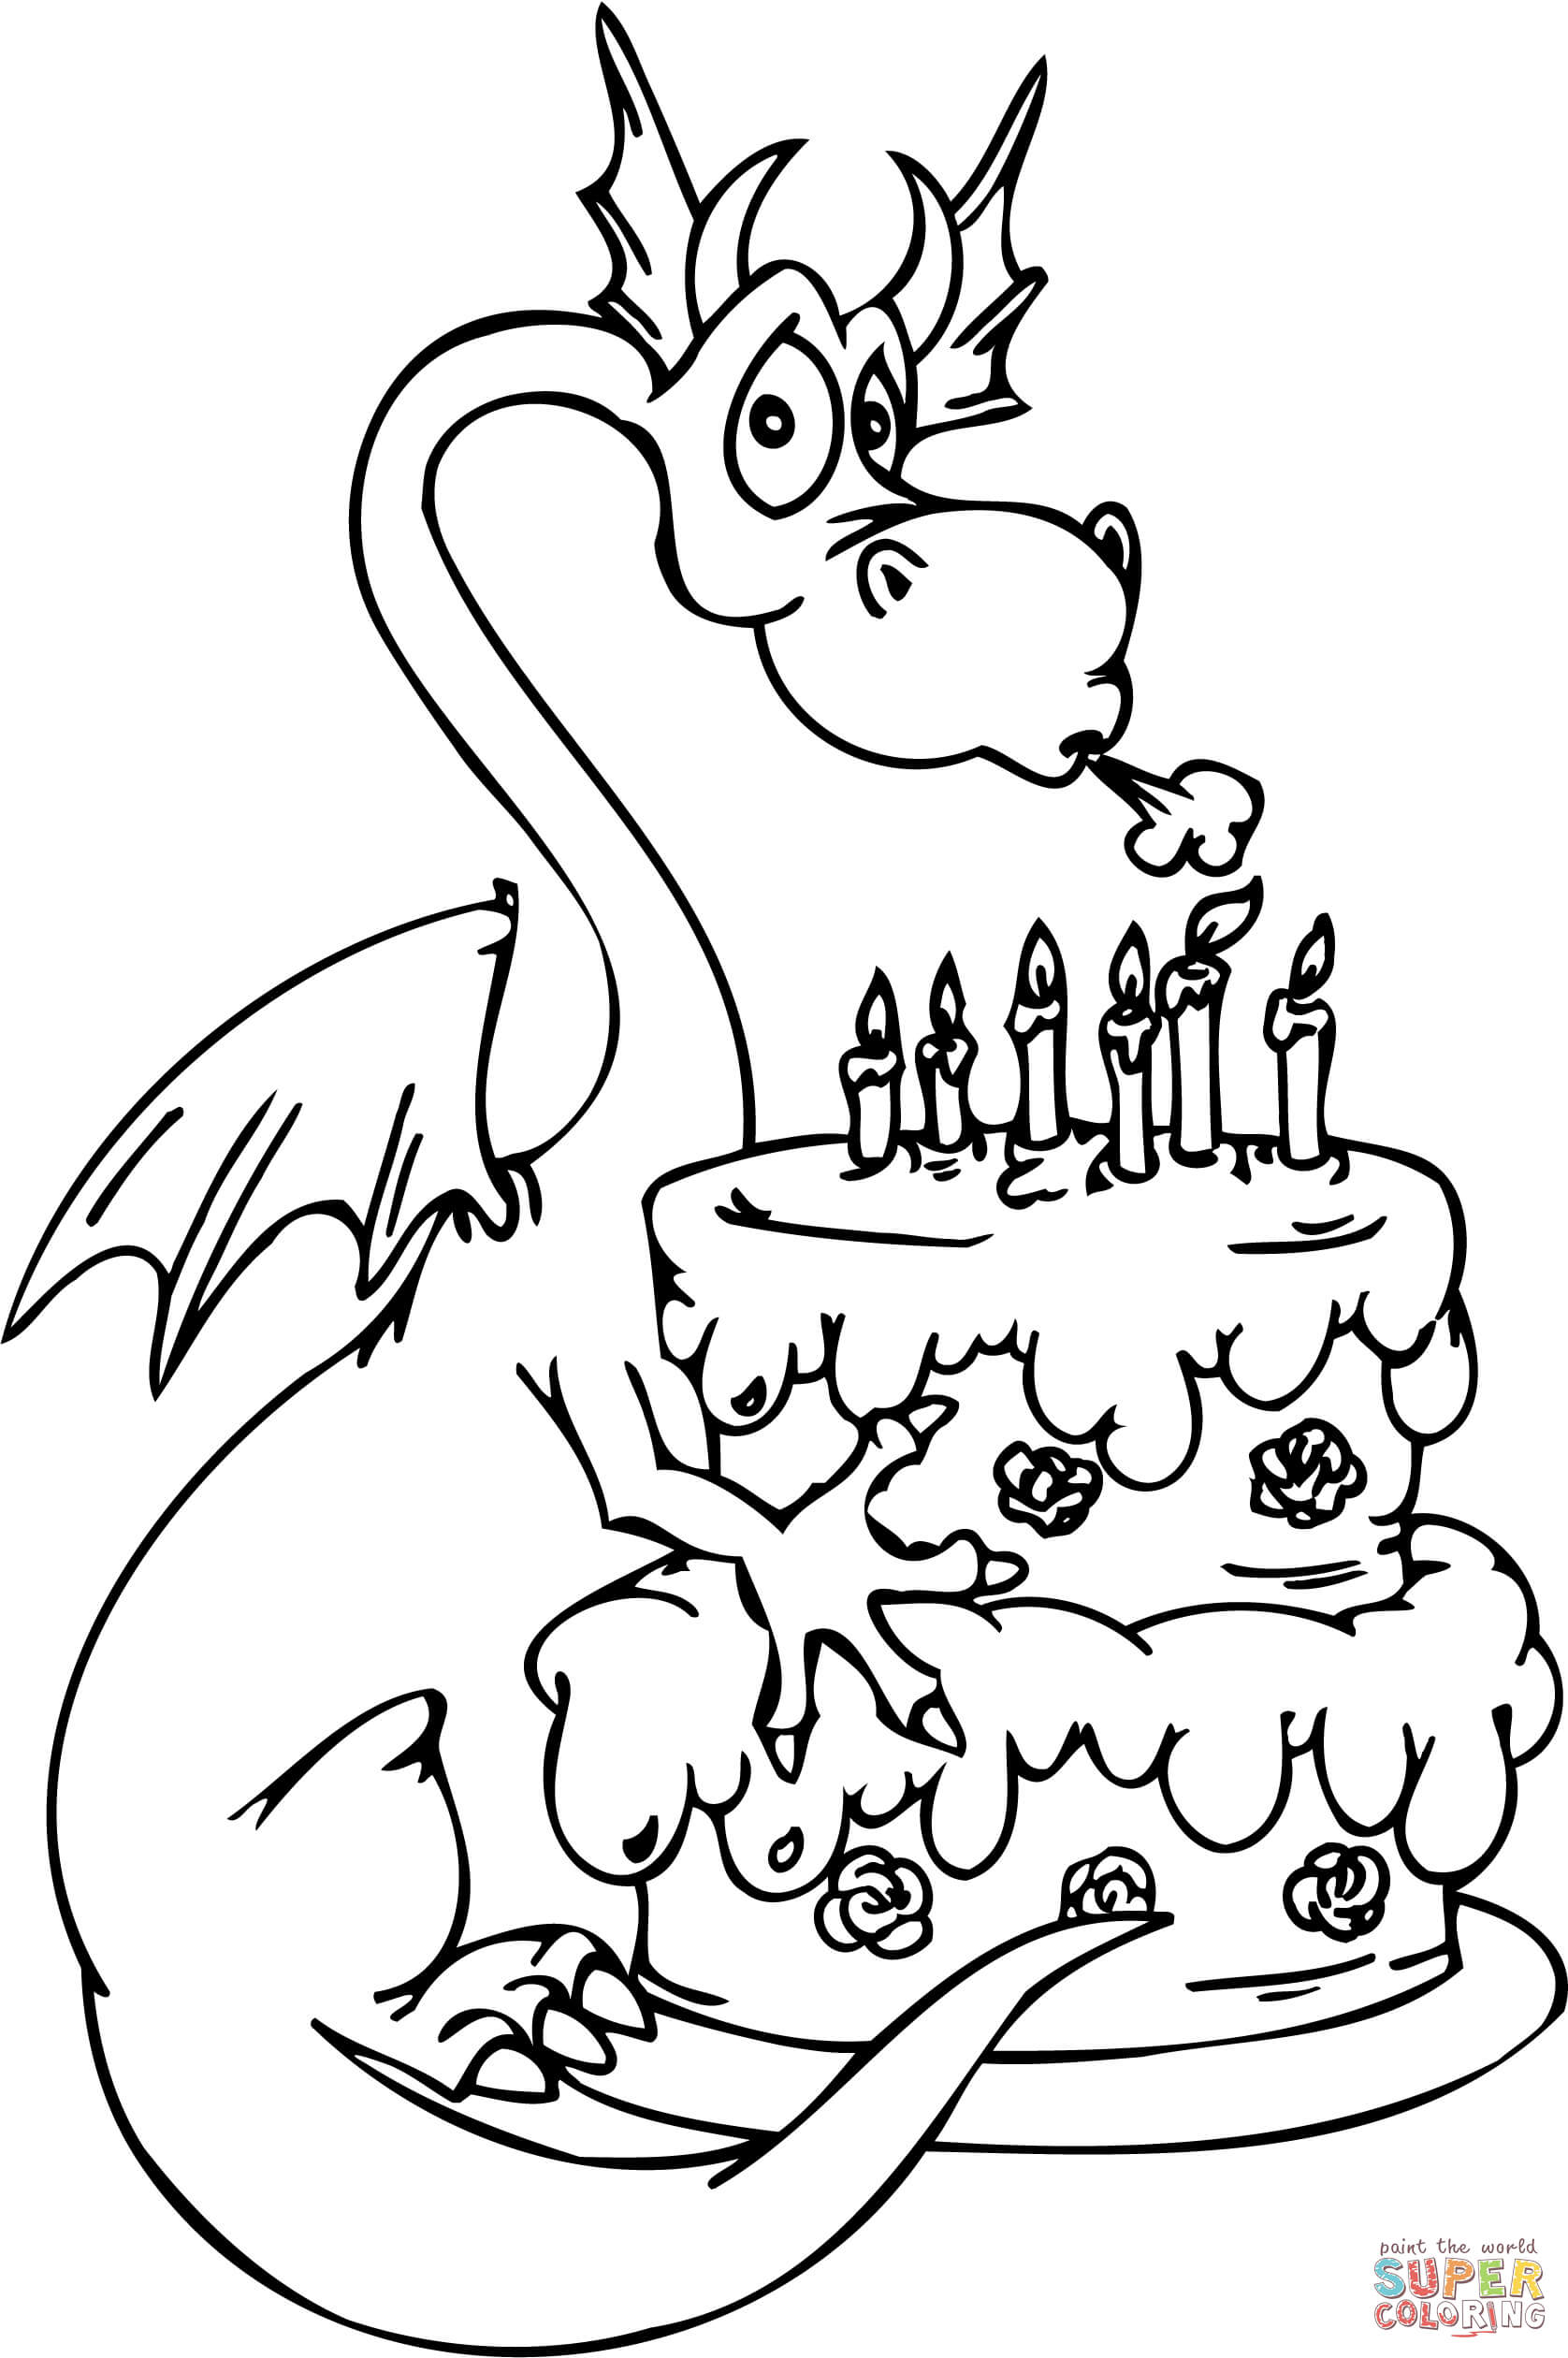 Happy Birthday Cake Coloring Pages - Coloring Home